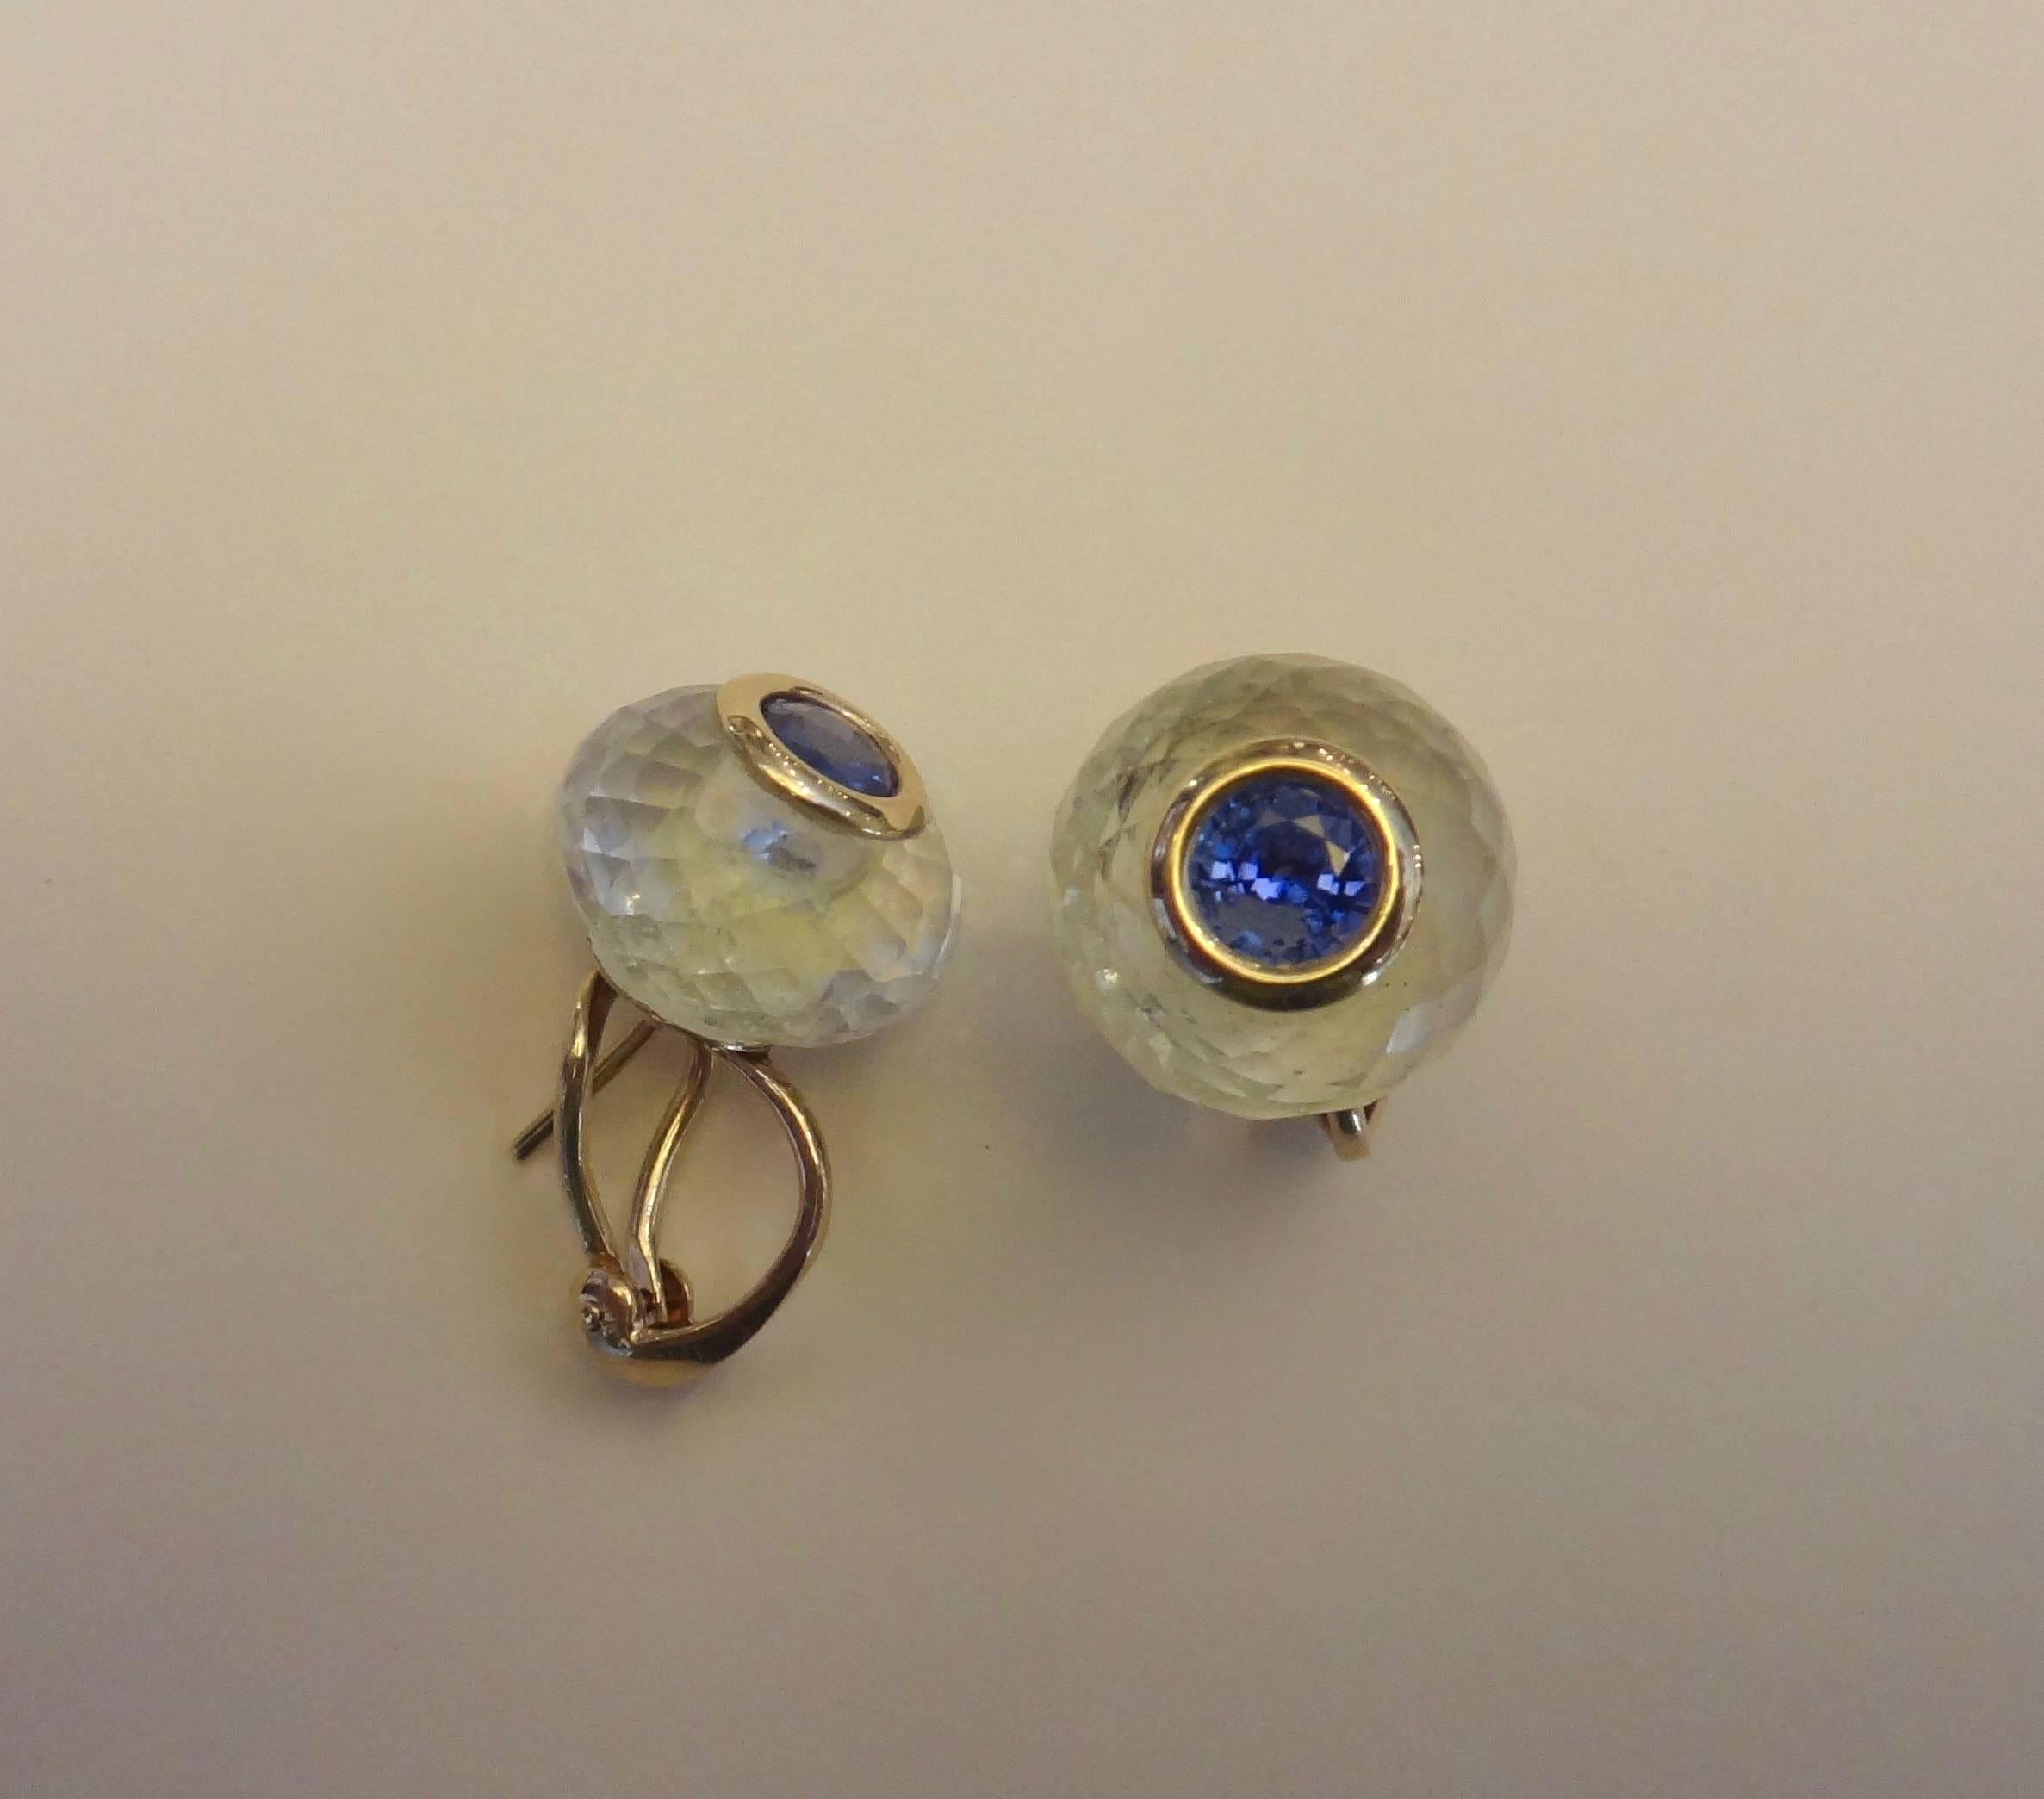 Brilliant cut and bright blue sapphires are bezel set within faceted rock crystal rondelles in these classic and emminently wearable stud earrings.  The earrings have posts with omega clip backs for safety.  